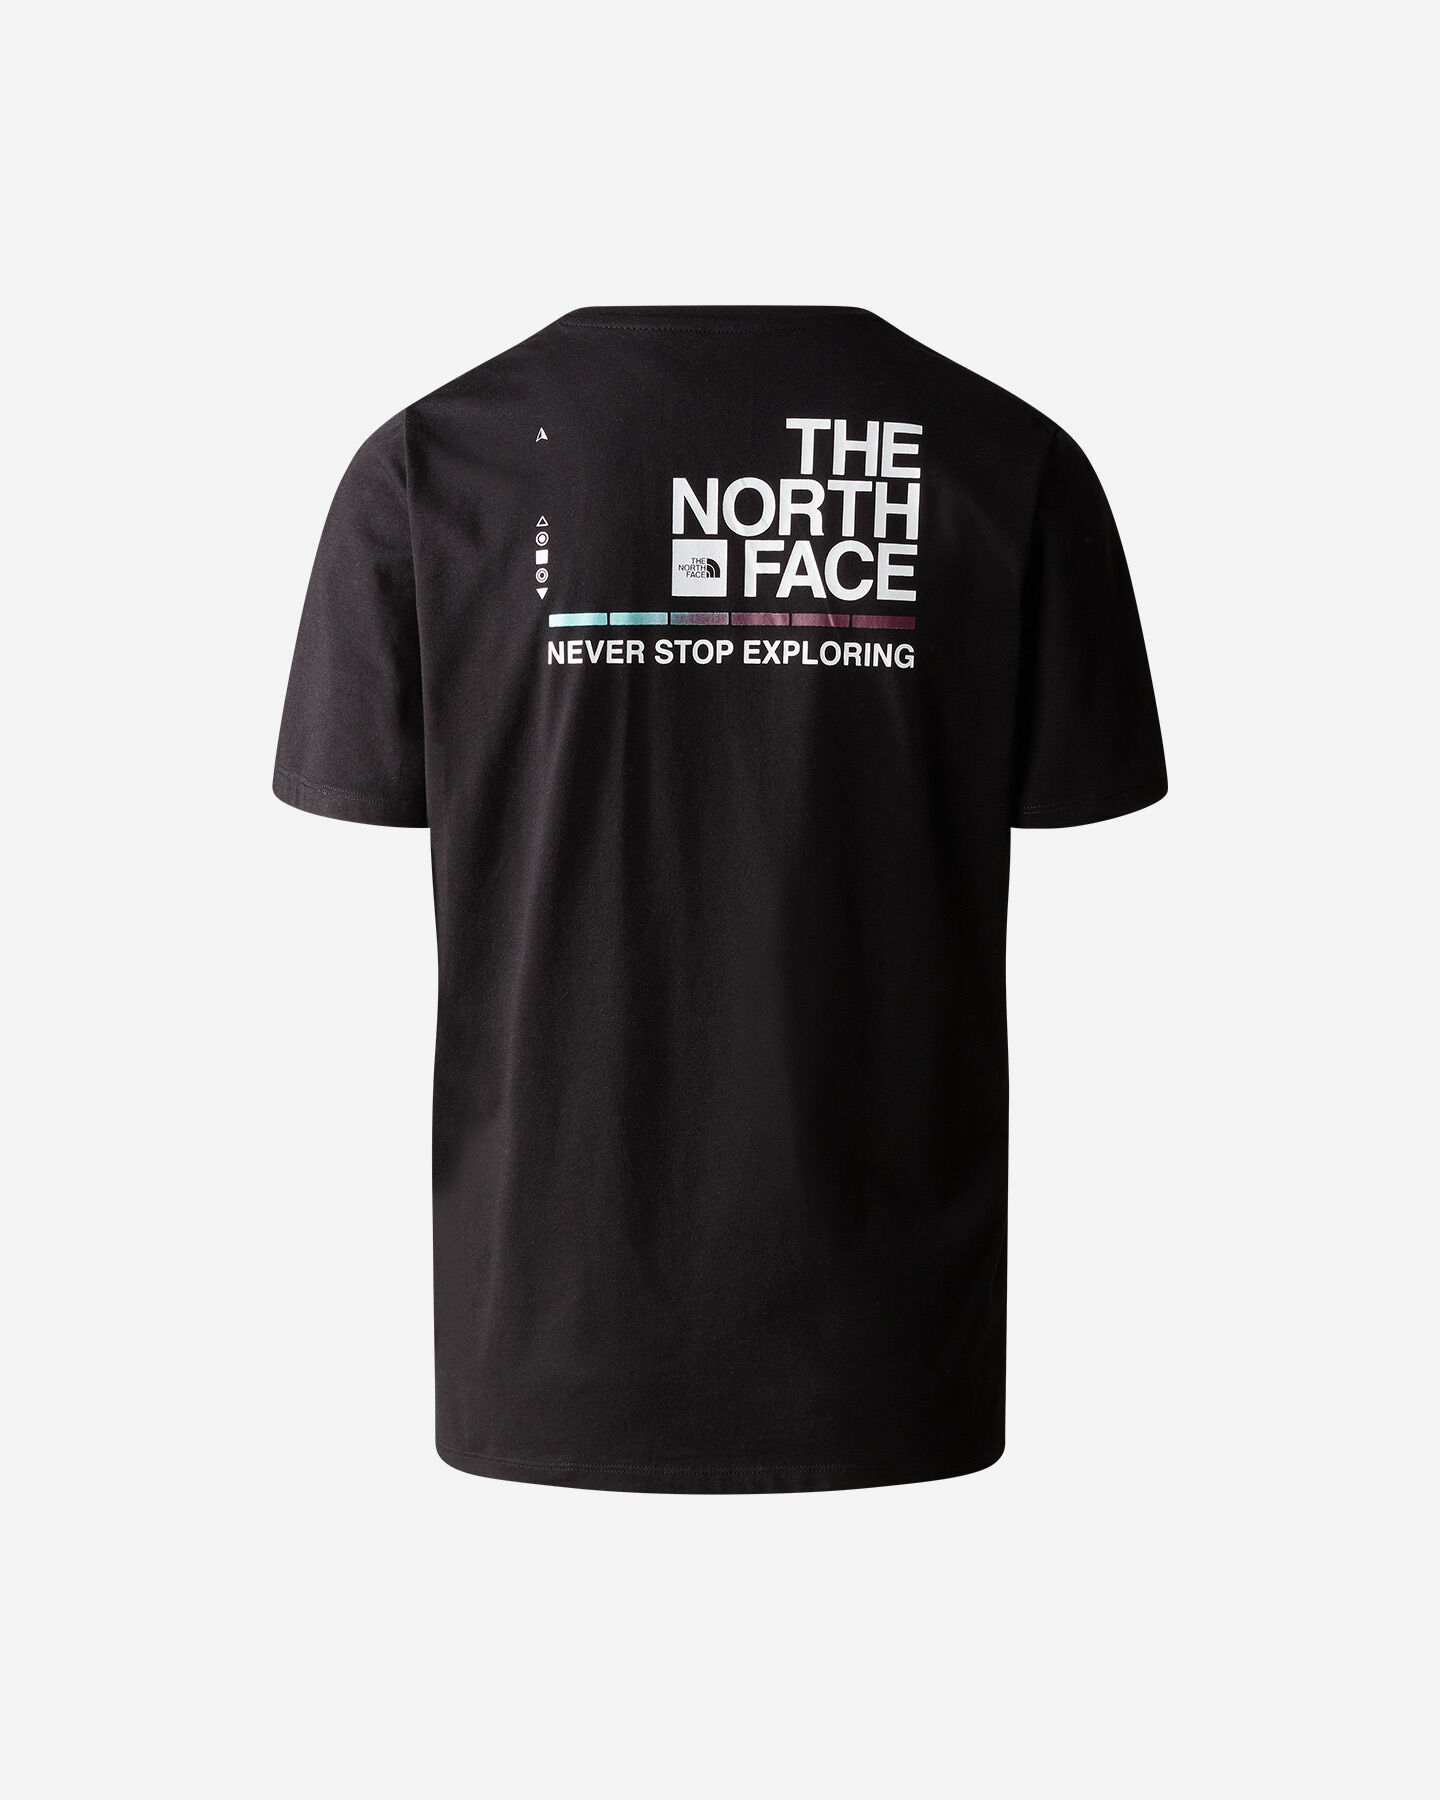  T-Shirt THE NORTH FACE FOUNDATION GRAPHIC W S5599501|KY4|XS scatto 1